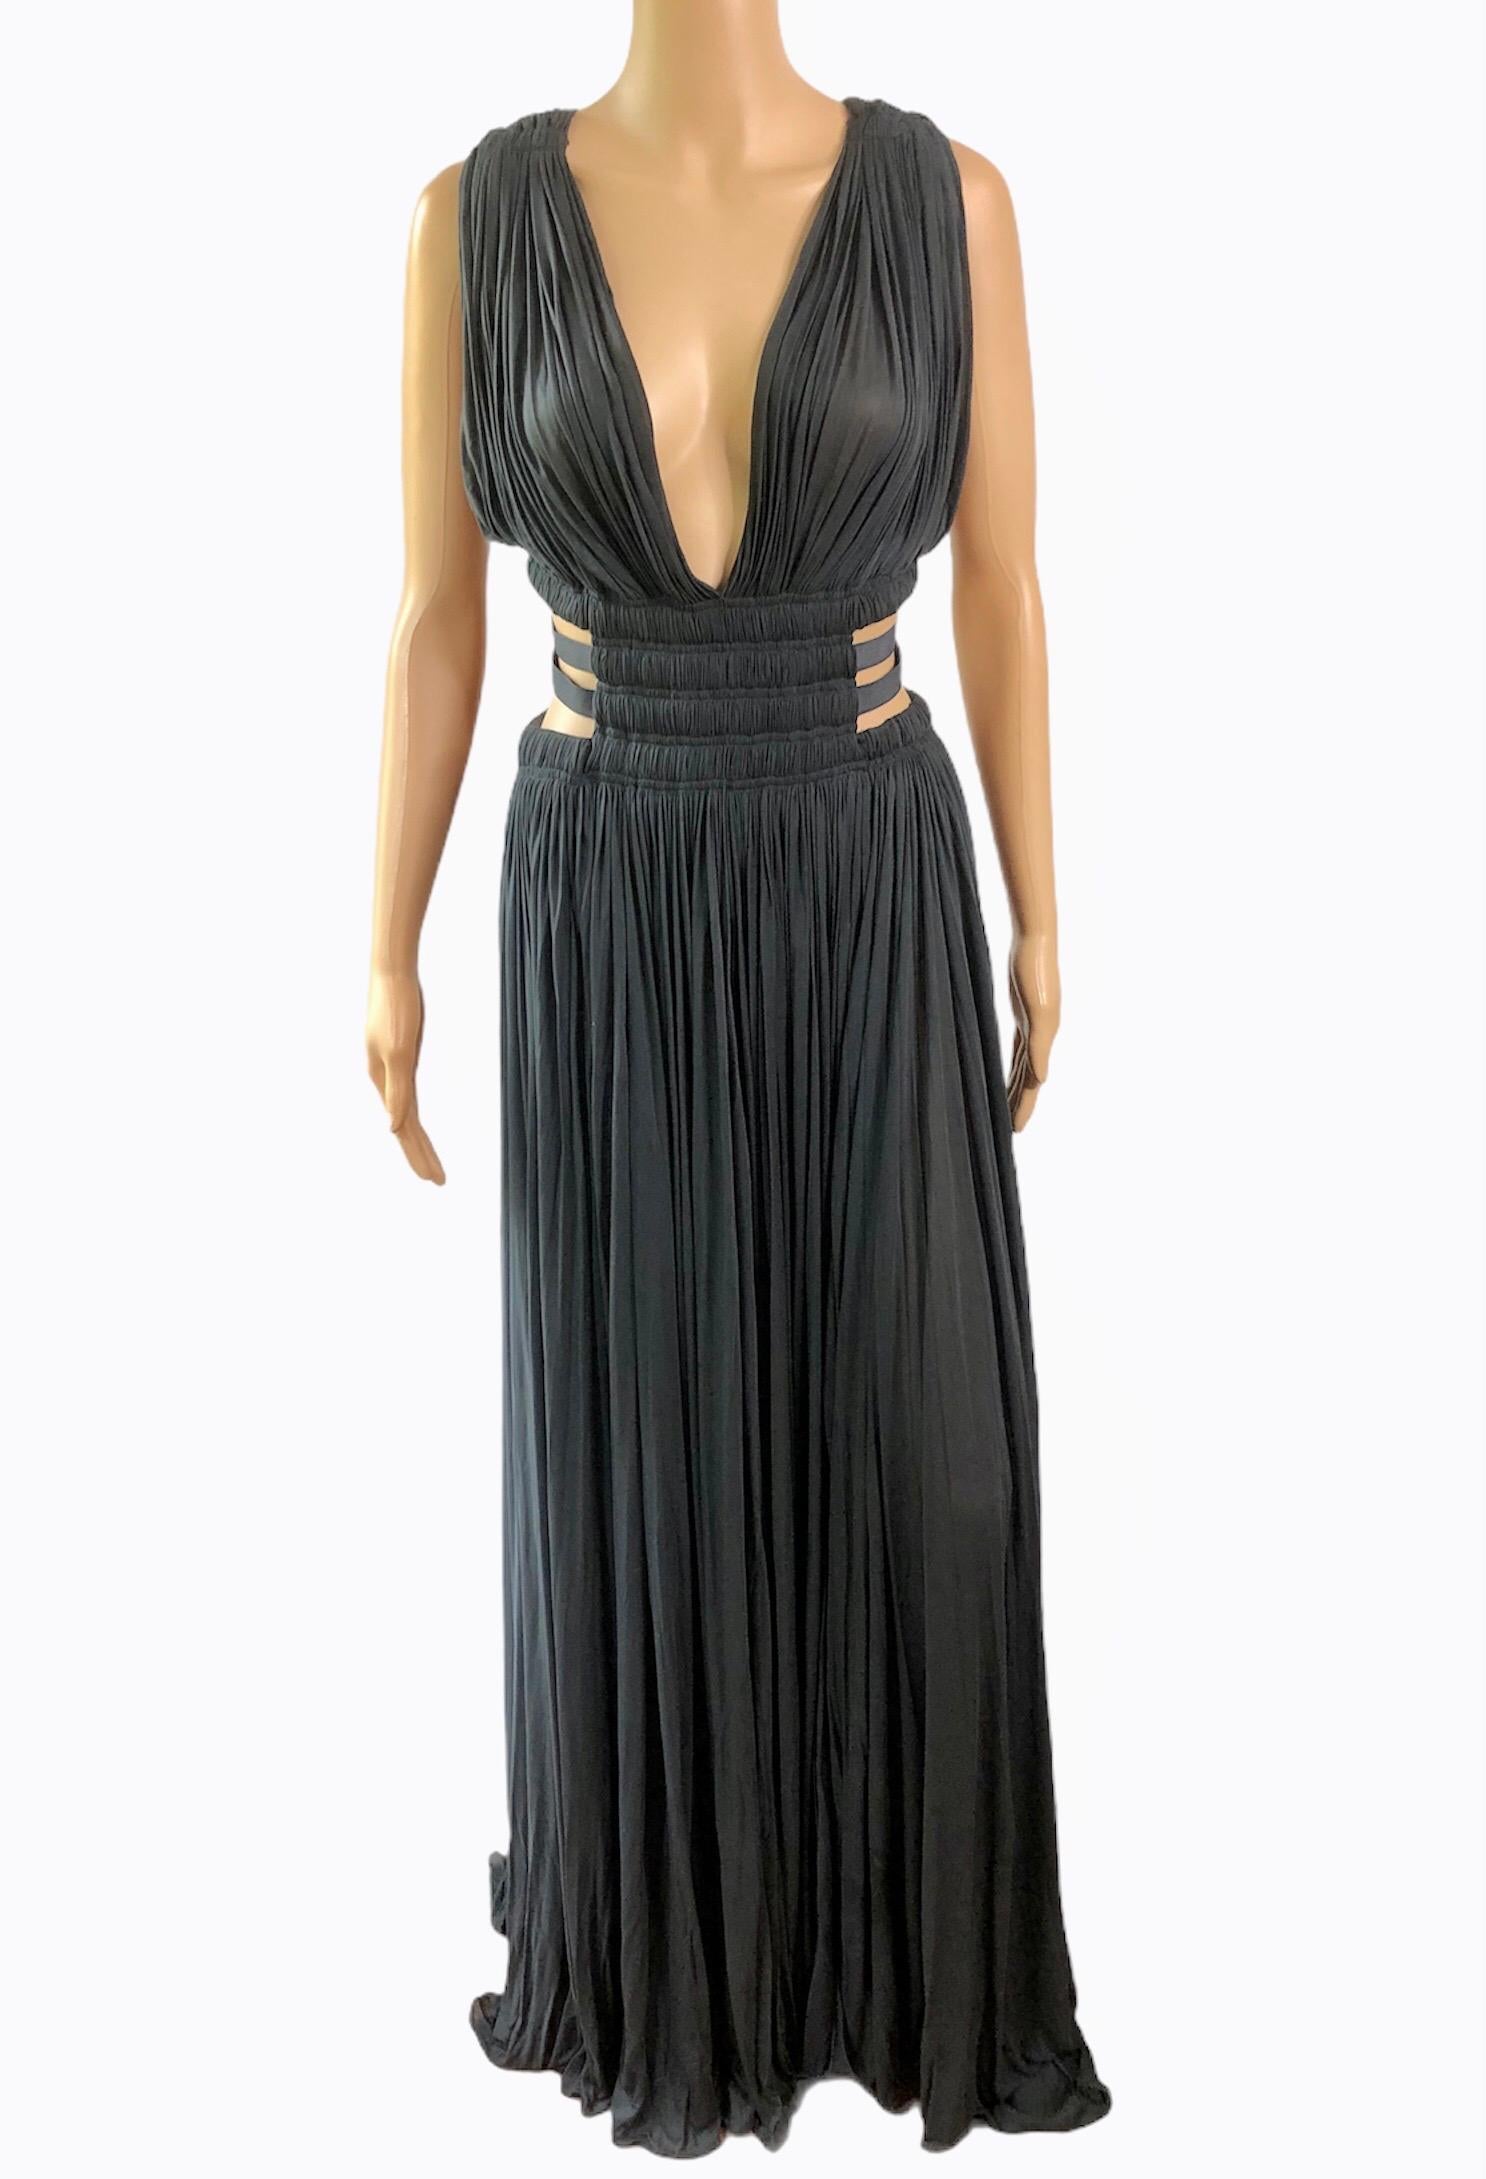 Azzedine Alaïa c.2004 Semi-Sheer Cutout Ruched Slits Gown Maxi Evening Dress In Good Condition For Sale In Naples, FL